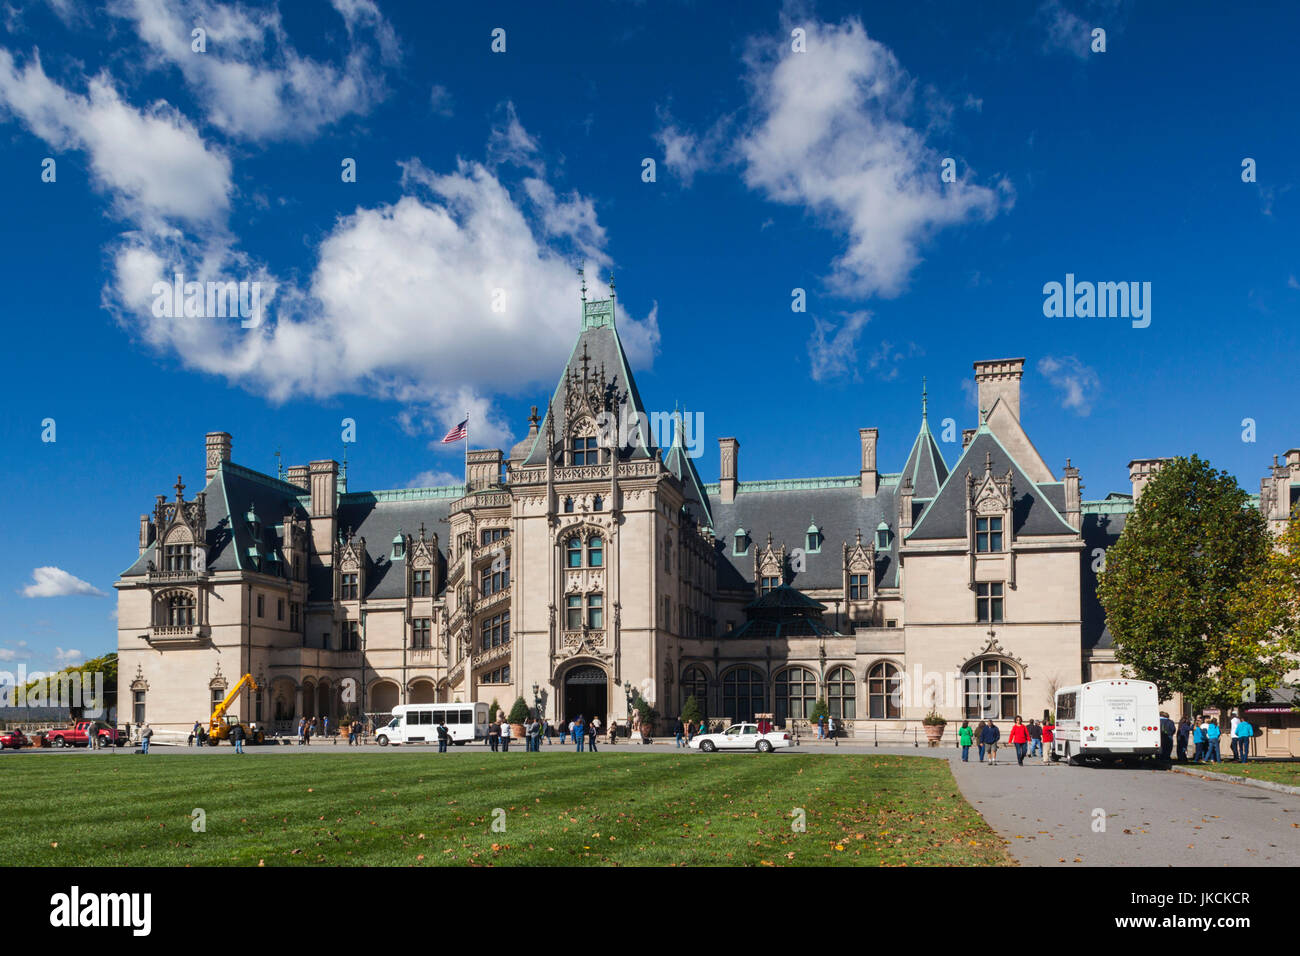 USA, North Carolina, Asheville, The Biltmore Estate, 250 room home formerly owned by George Vanderbilt Stock Photo